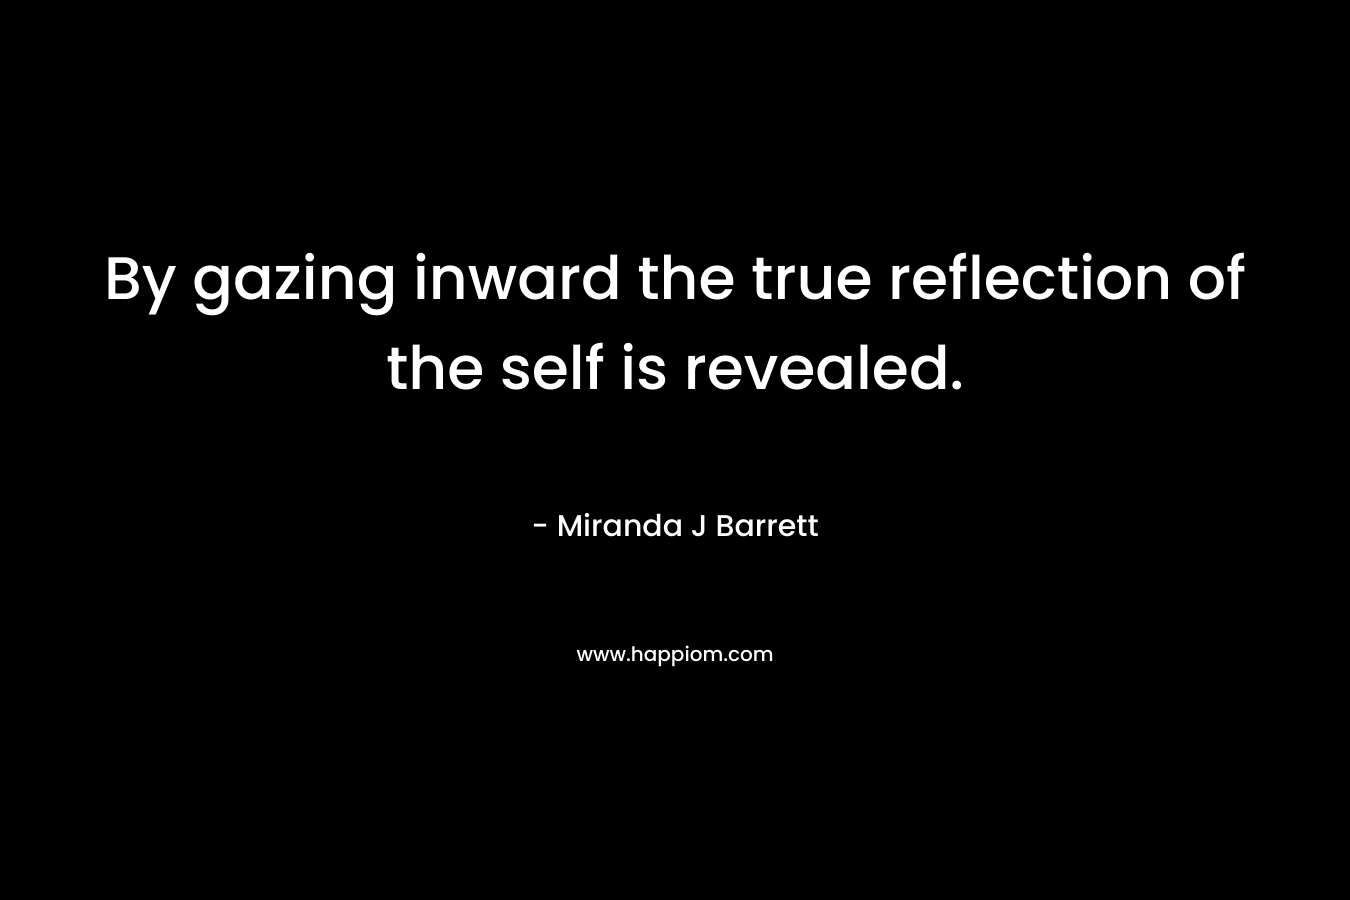 By gazing inward the true reflection of the self is revealed.